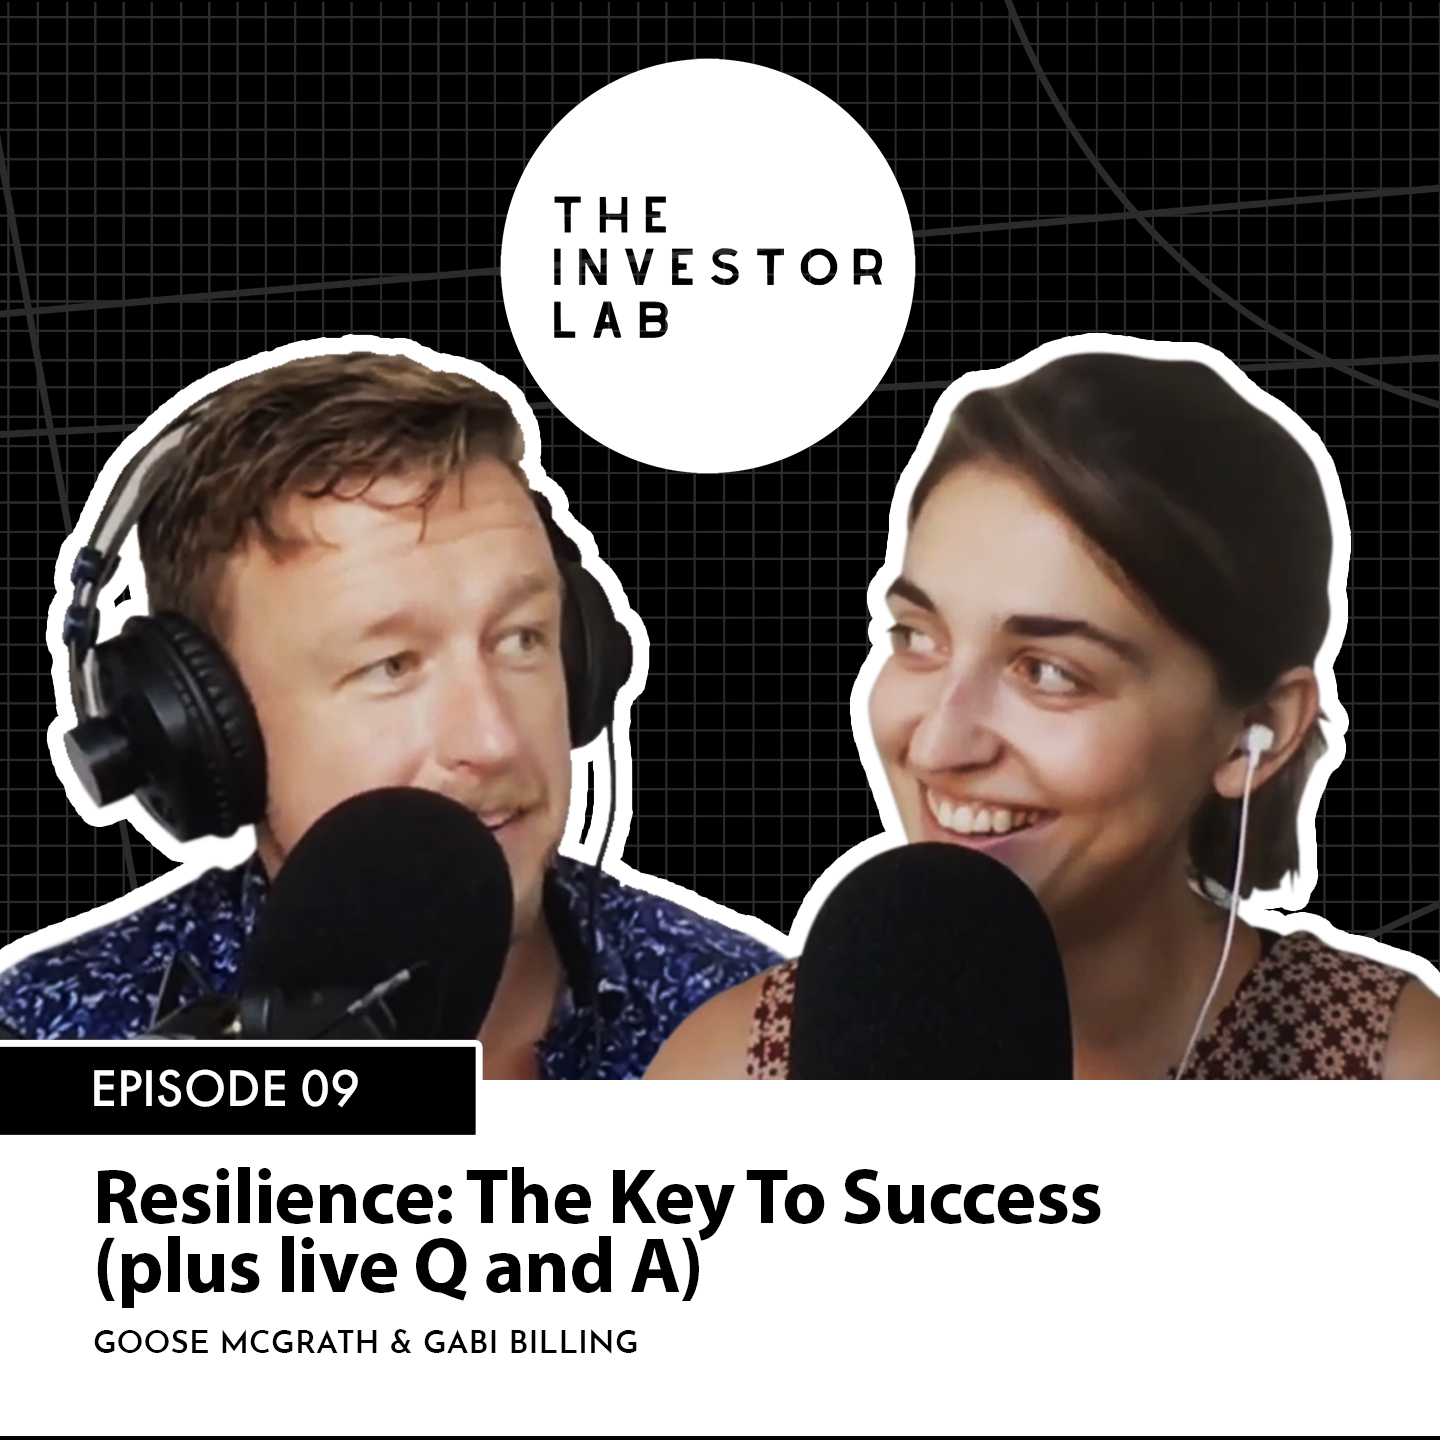 Resilience: The Key To Success (Plus live Q and A)